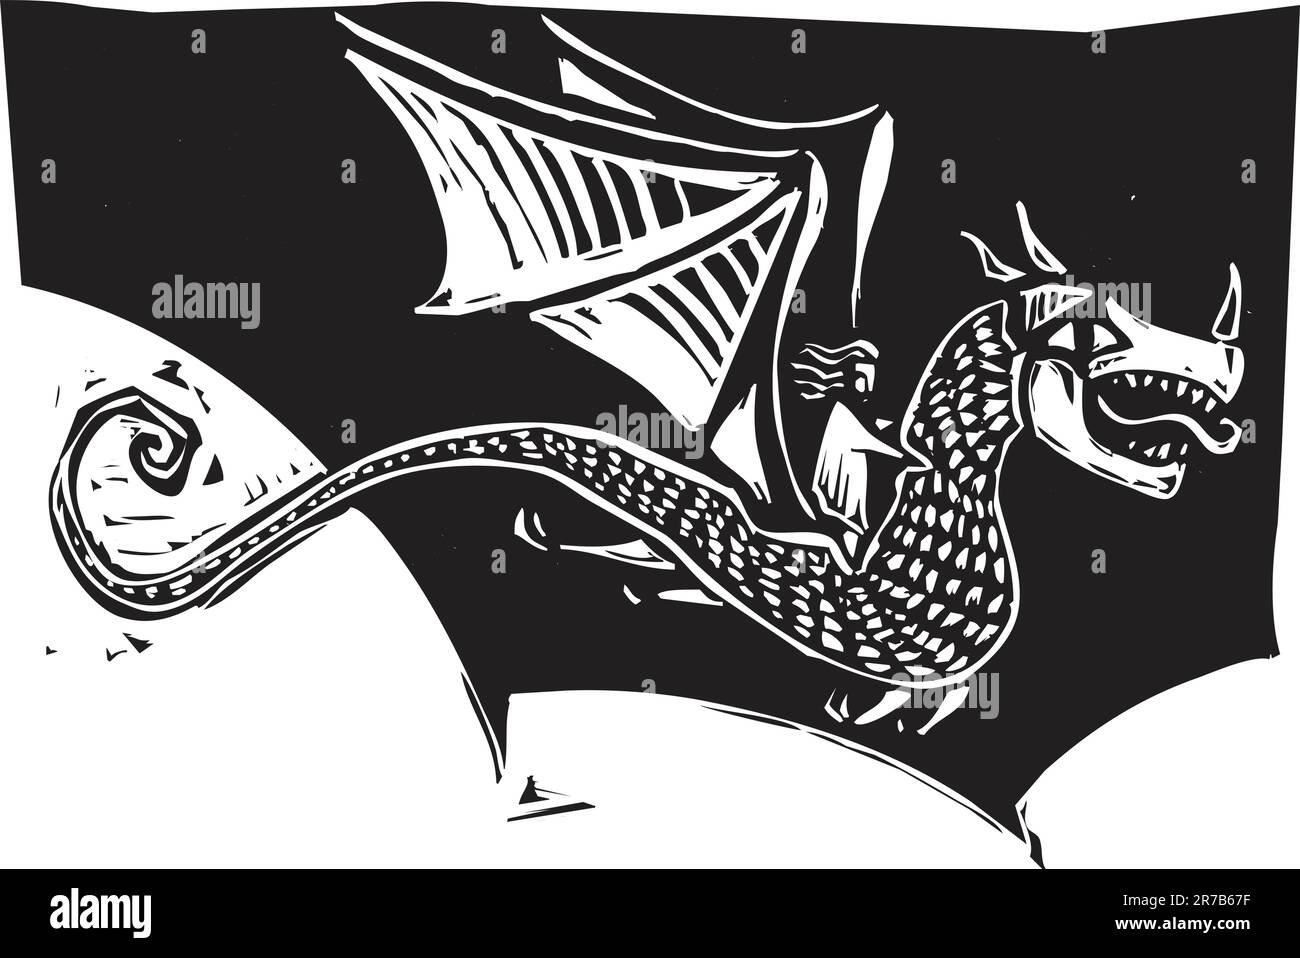 Woman riding on the back of a dragon in a woodcut style image. Stock Vector